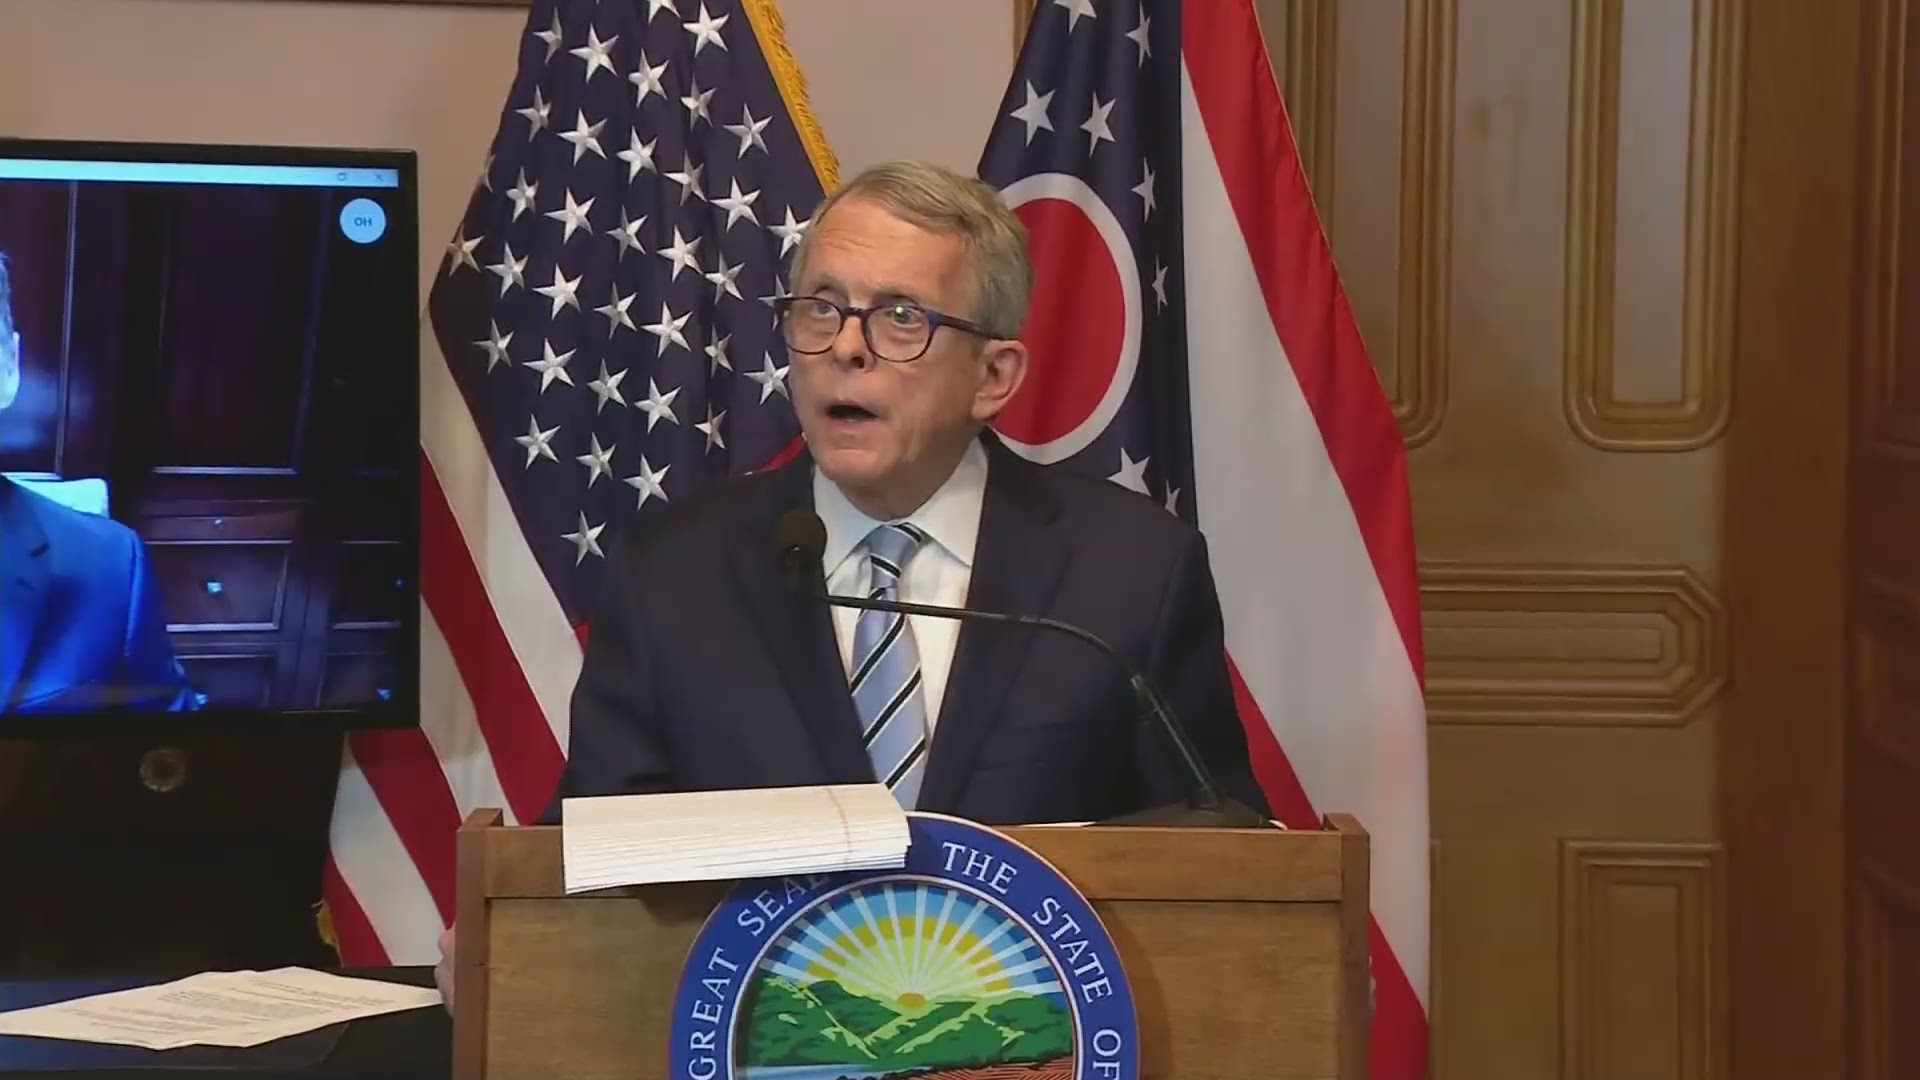 Mike DeWine says there are two major lessons that we've learned since this crisis.  We have to invest more in public health & we must be able to afford medical gear.